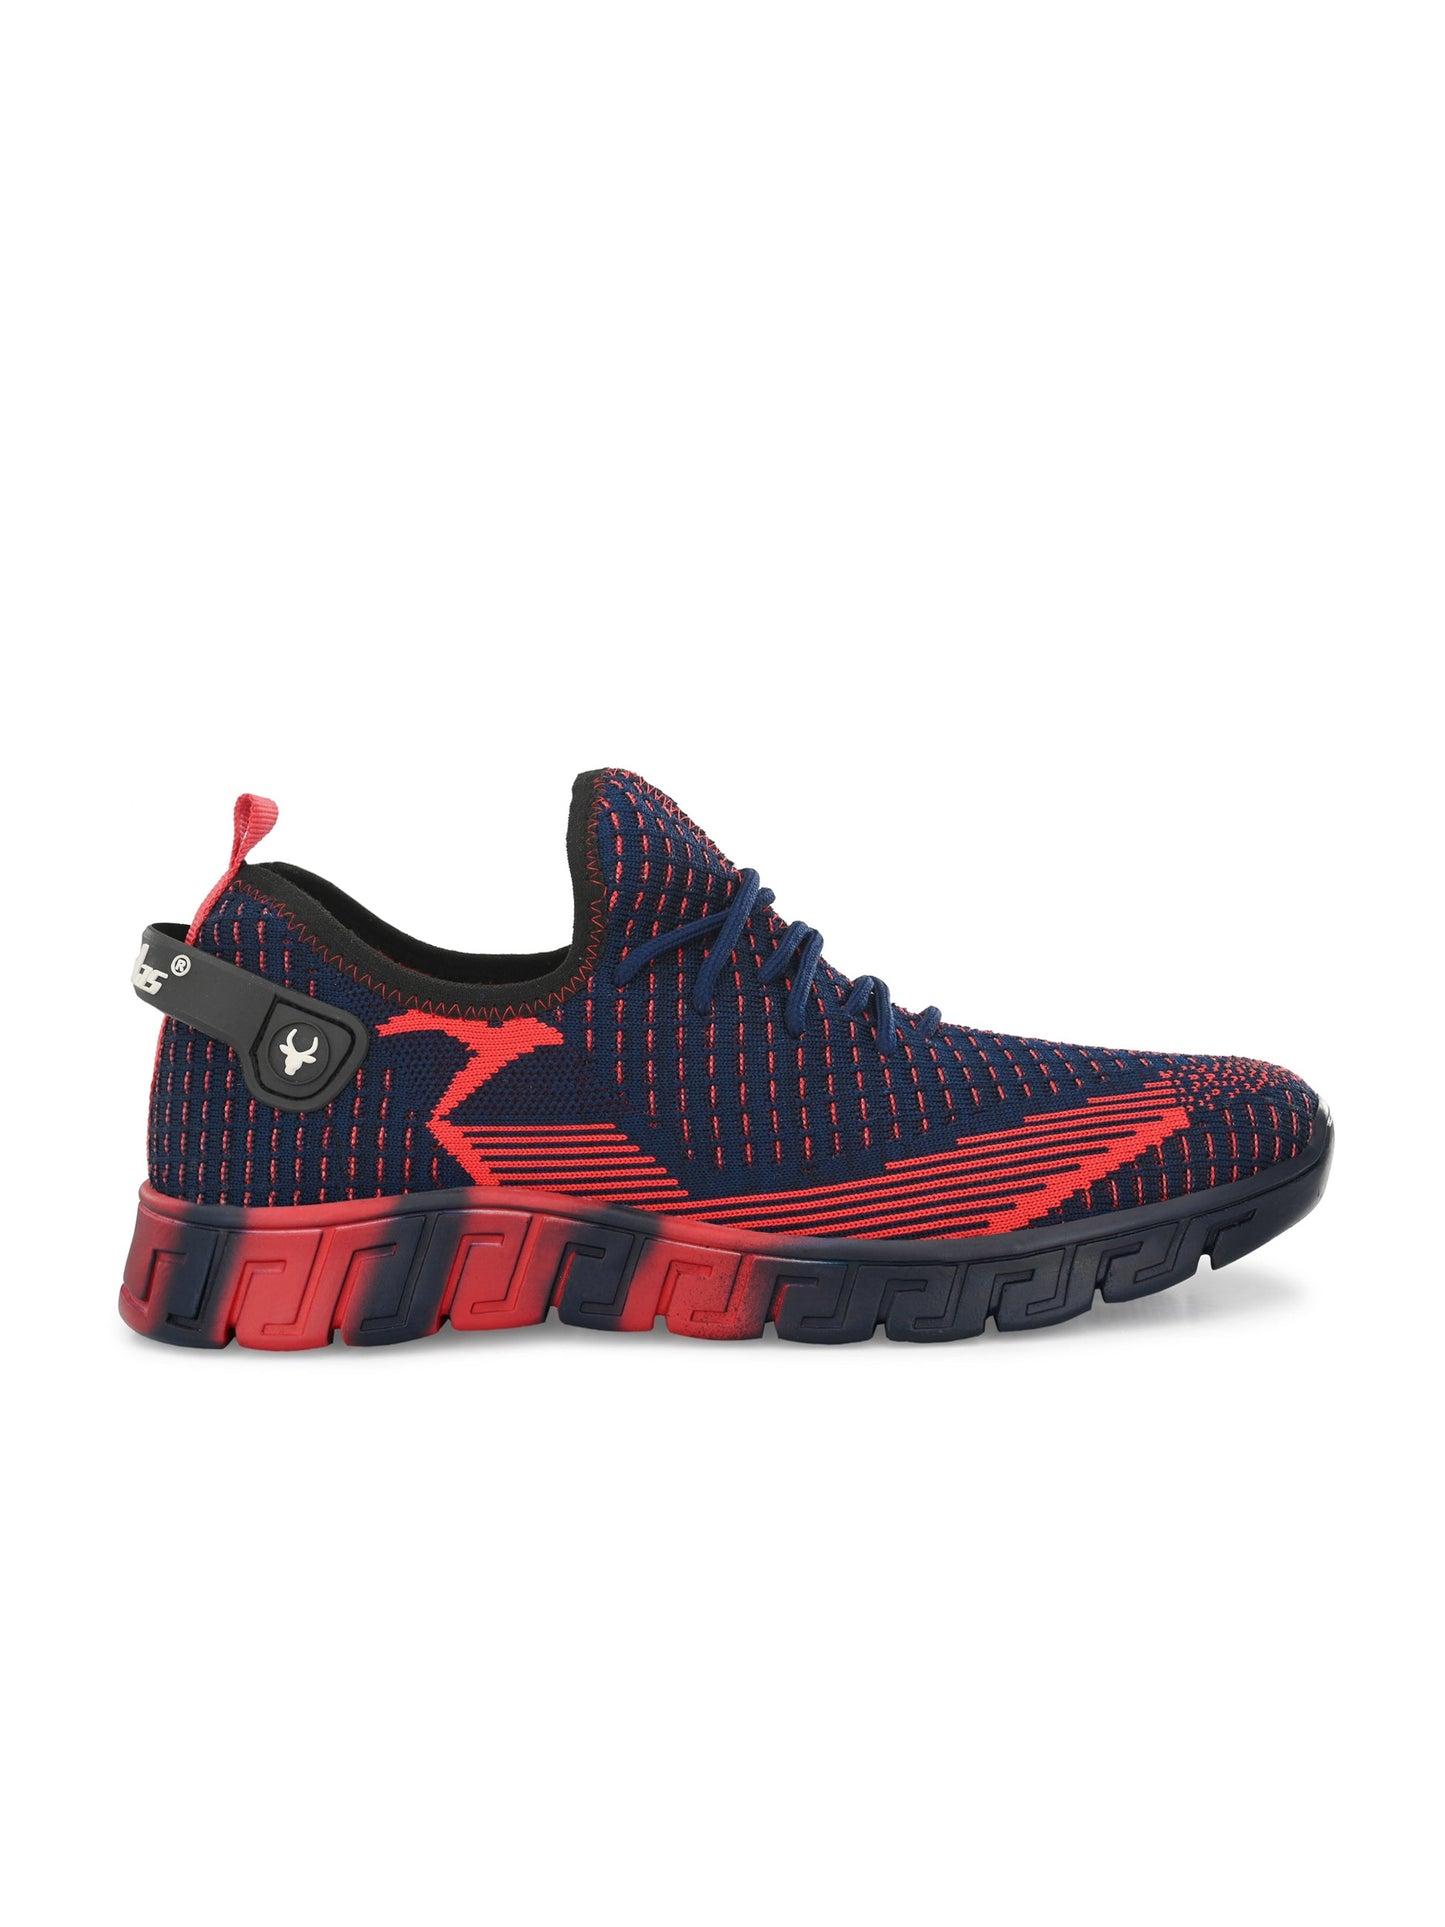 Hirolas® Men's Blue/Red Knitted Athleisure Lace Up Sport Shoes (HRL2015BLU)